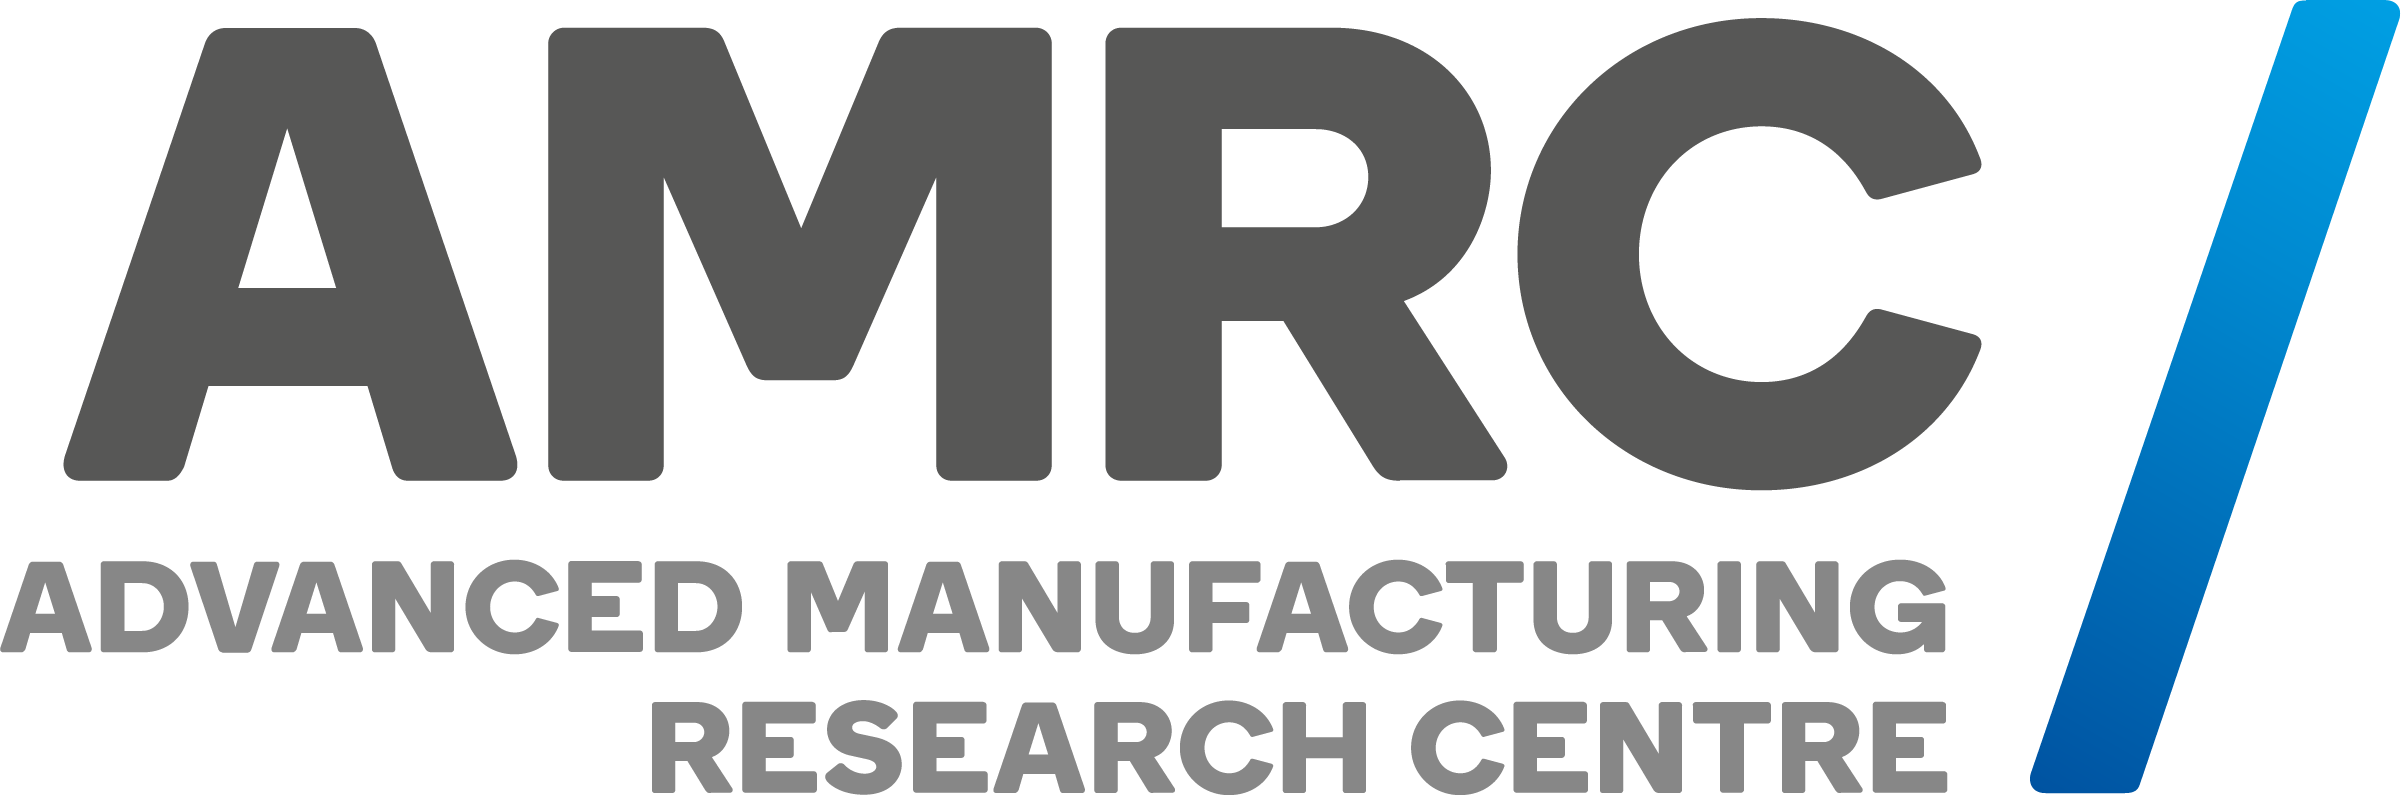 Advanced Manufacturing Research Centre for the University of Sheffield